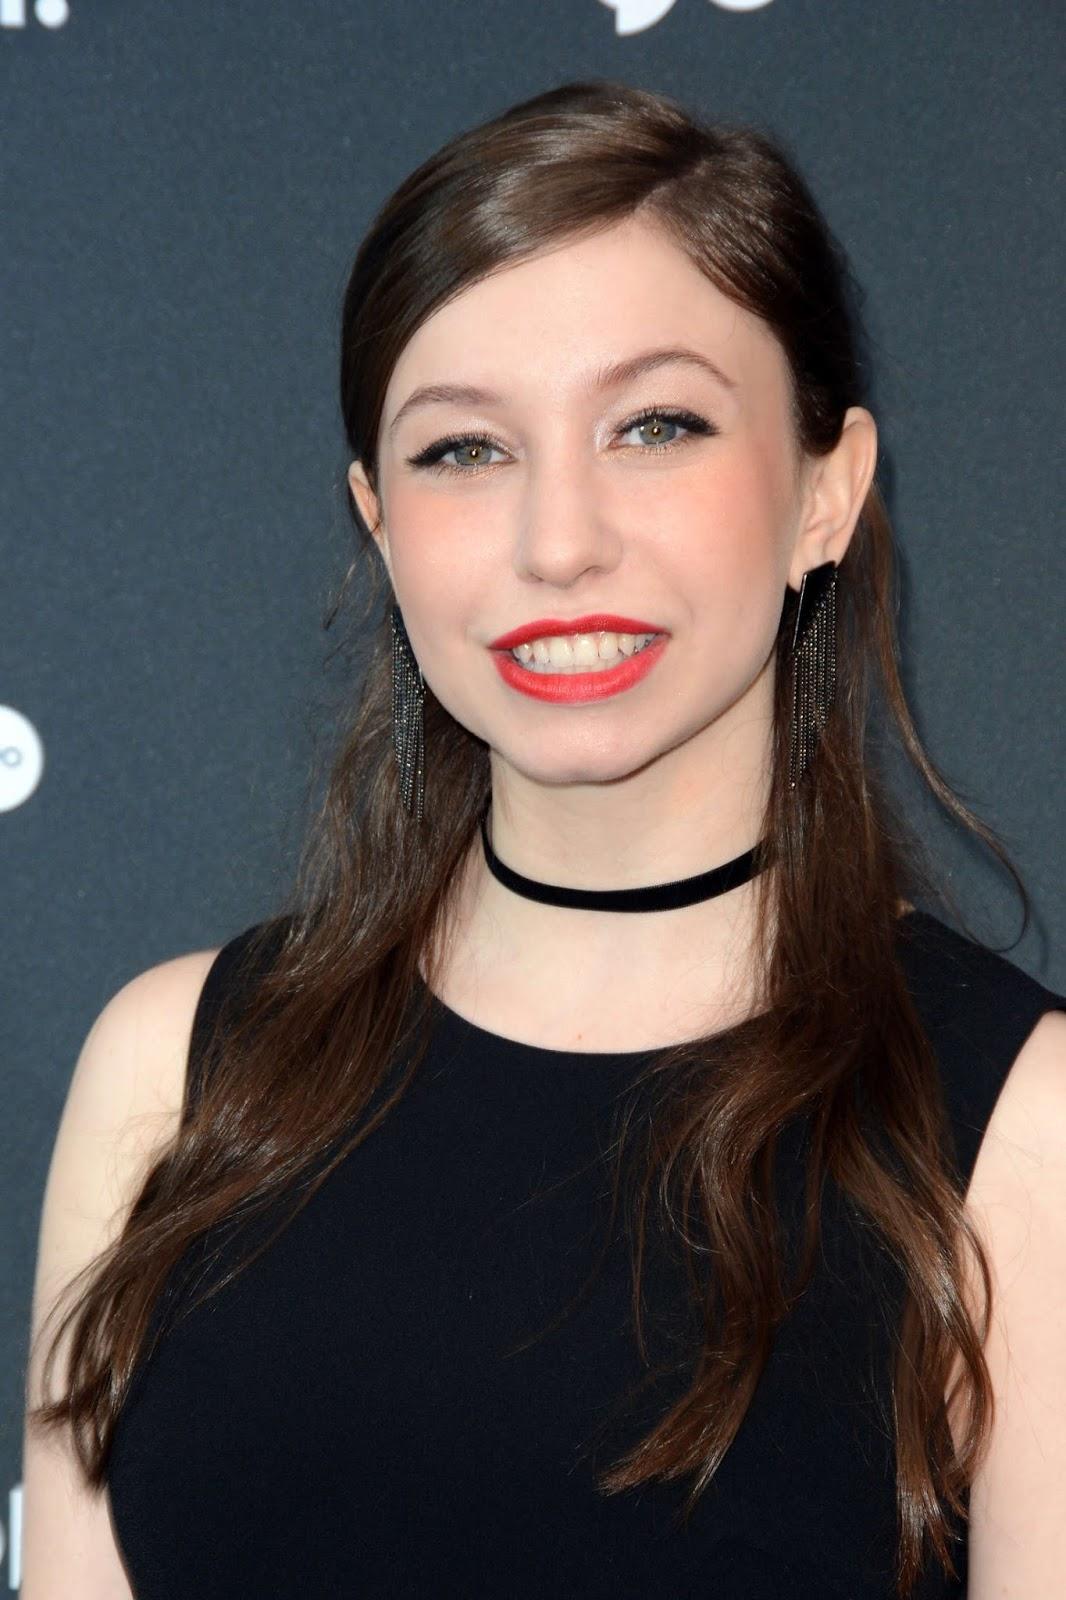 70+ Hot Pictures Of Katelyn Nacon Which Are Sure to Catch Your Attention 265